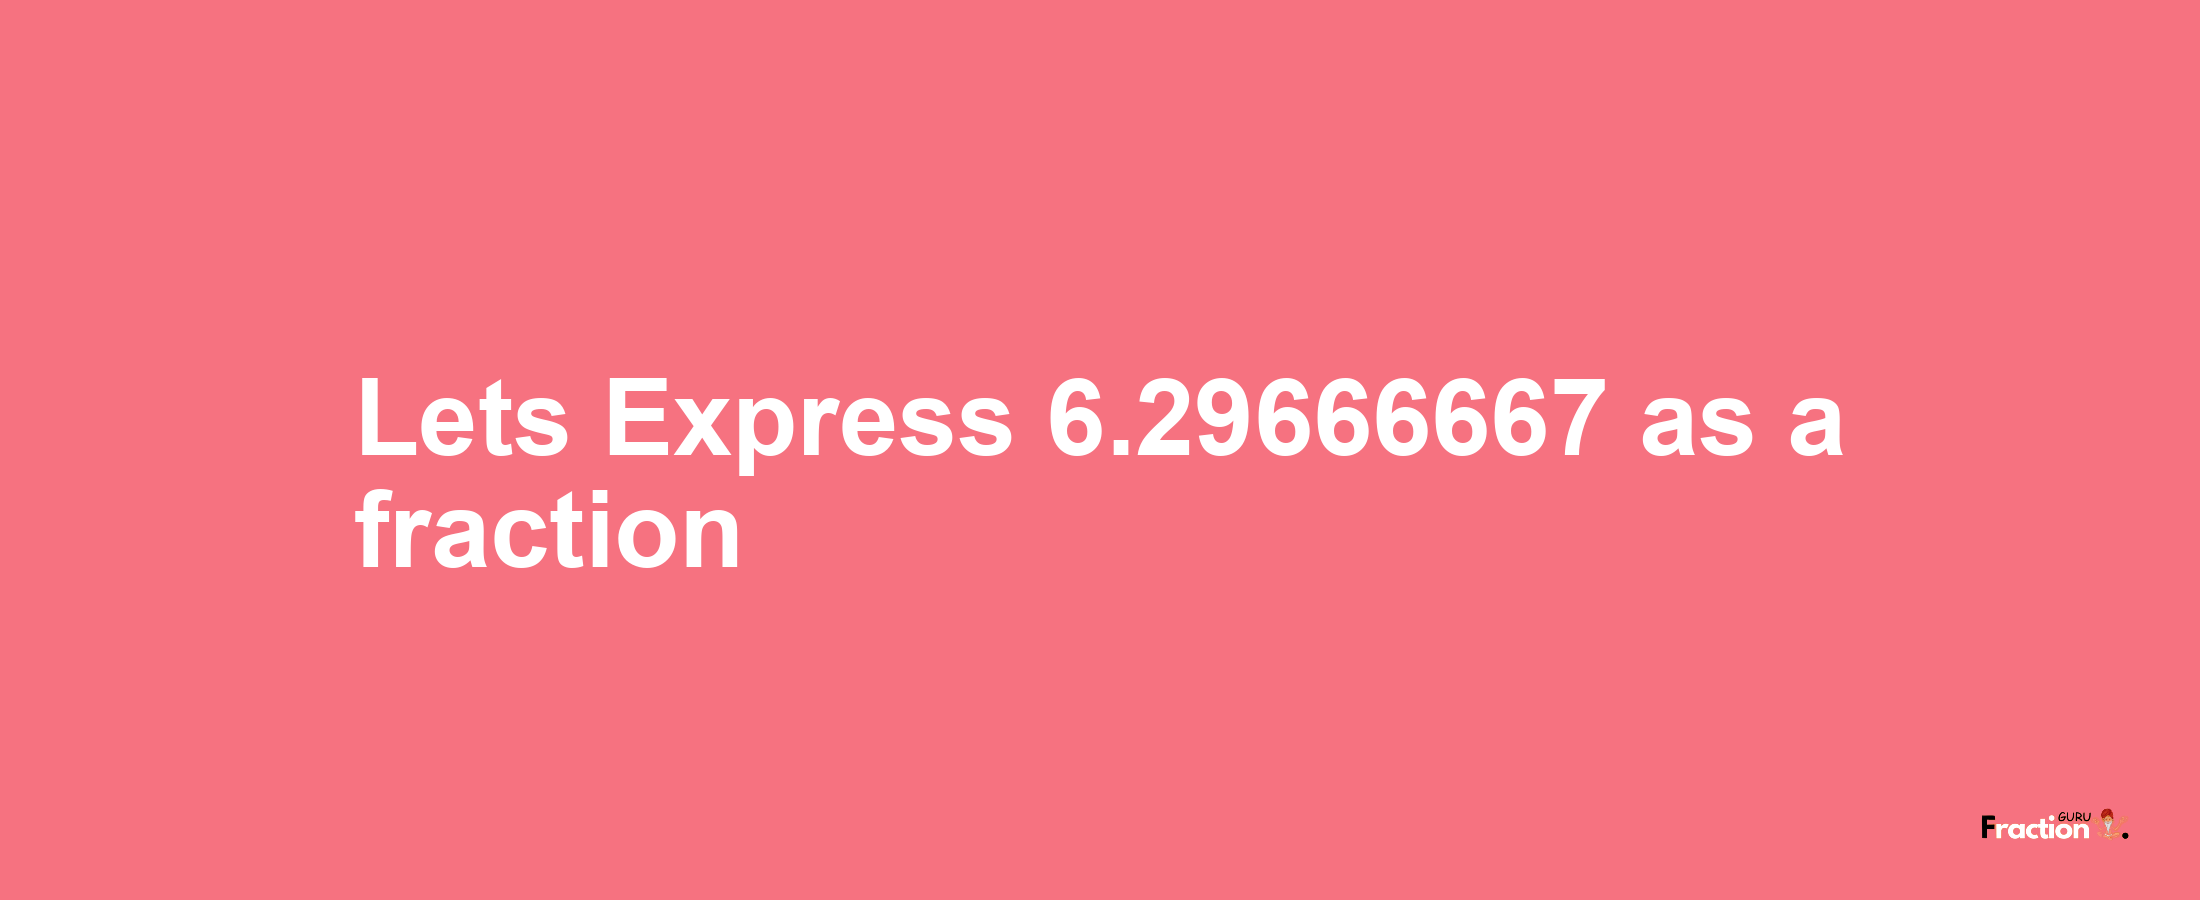 Lets Express 6.29666667 as afraction